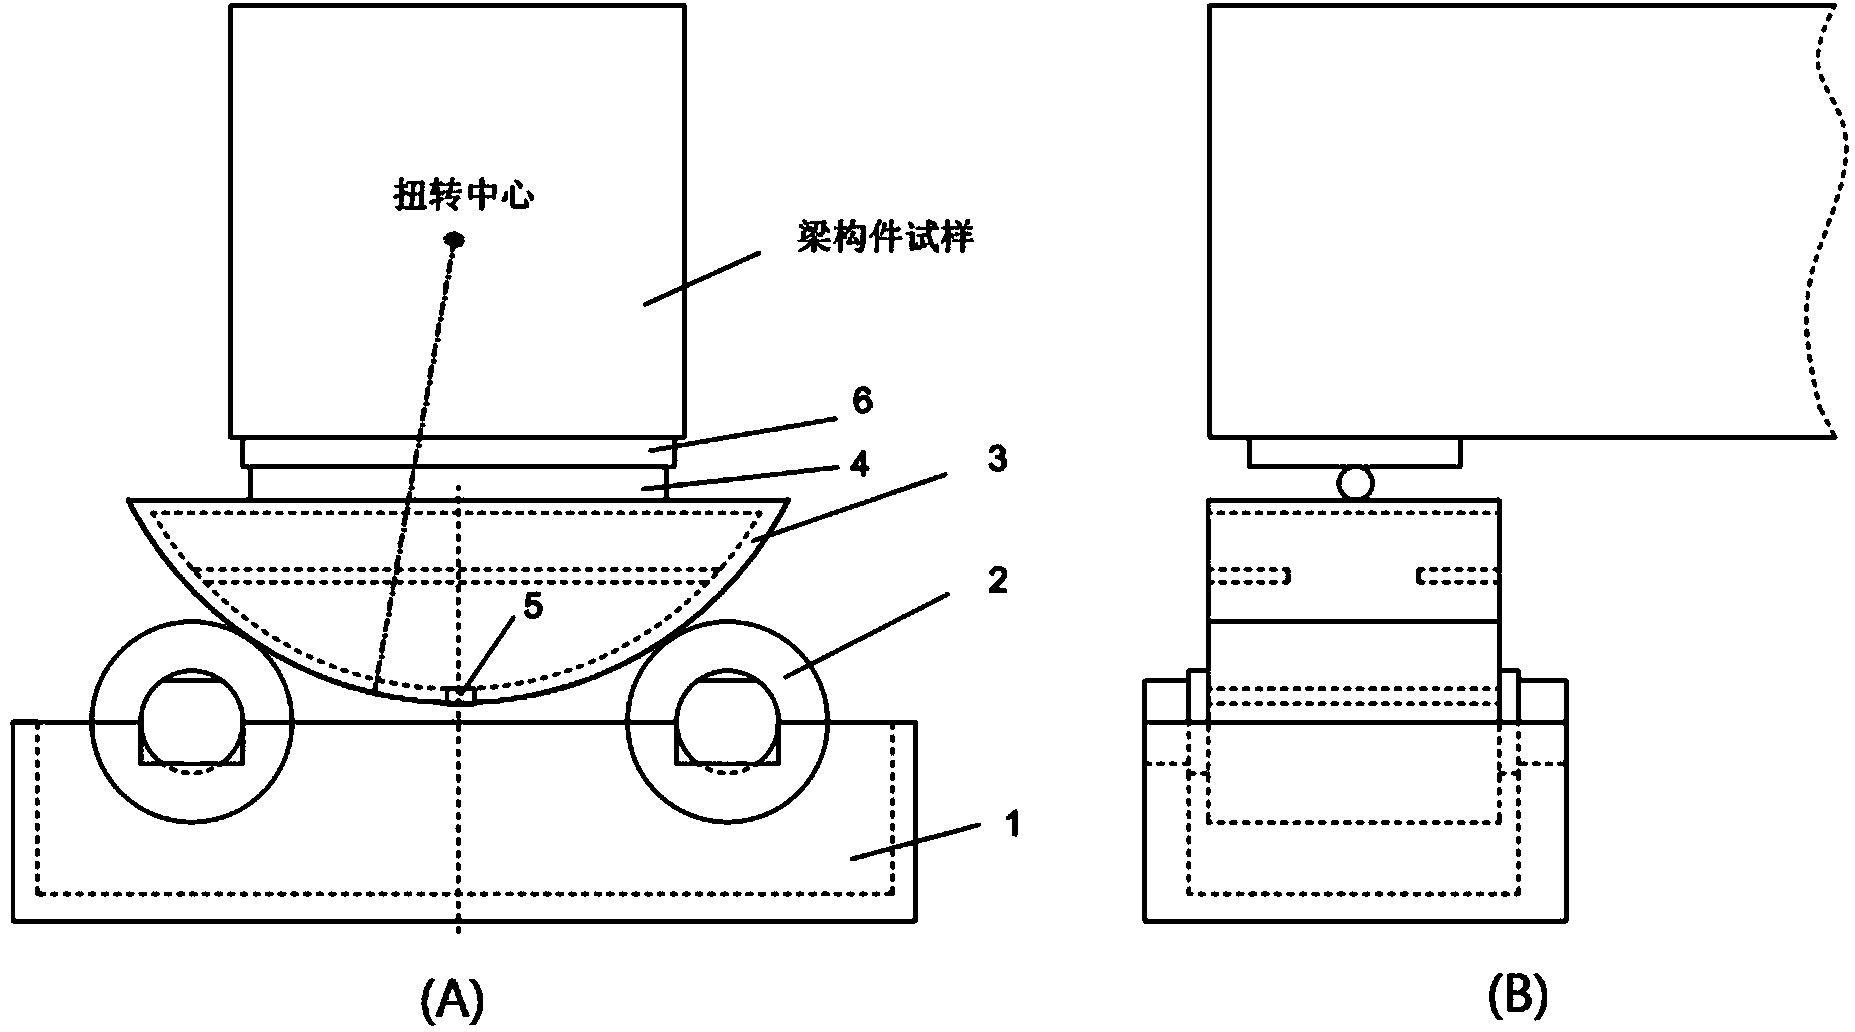 Beam component bending and torsion combined load test device and method